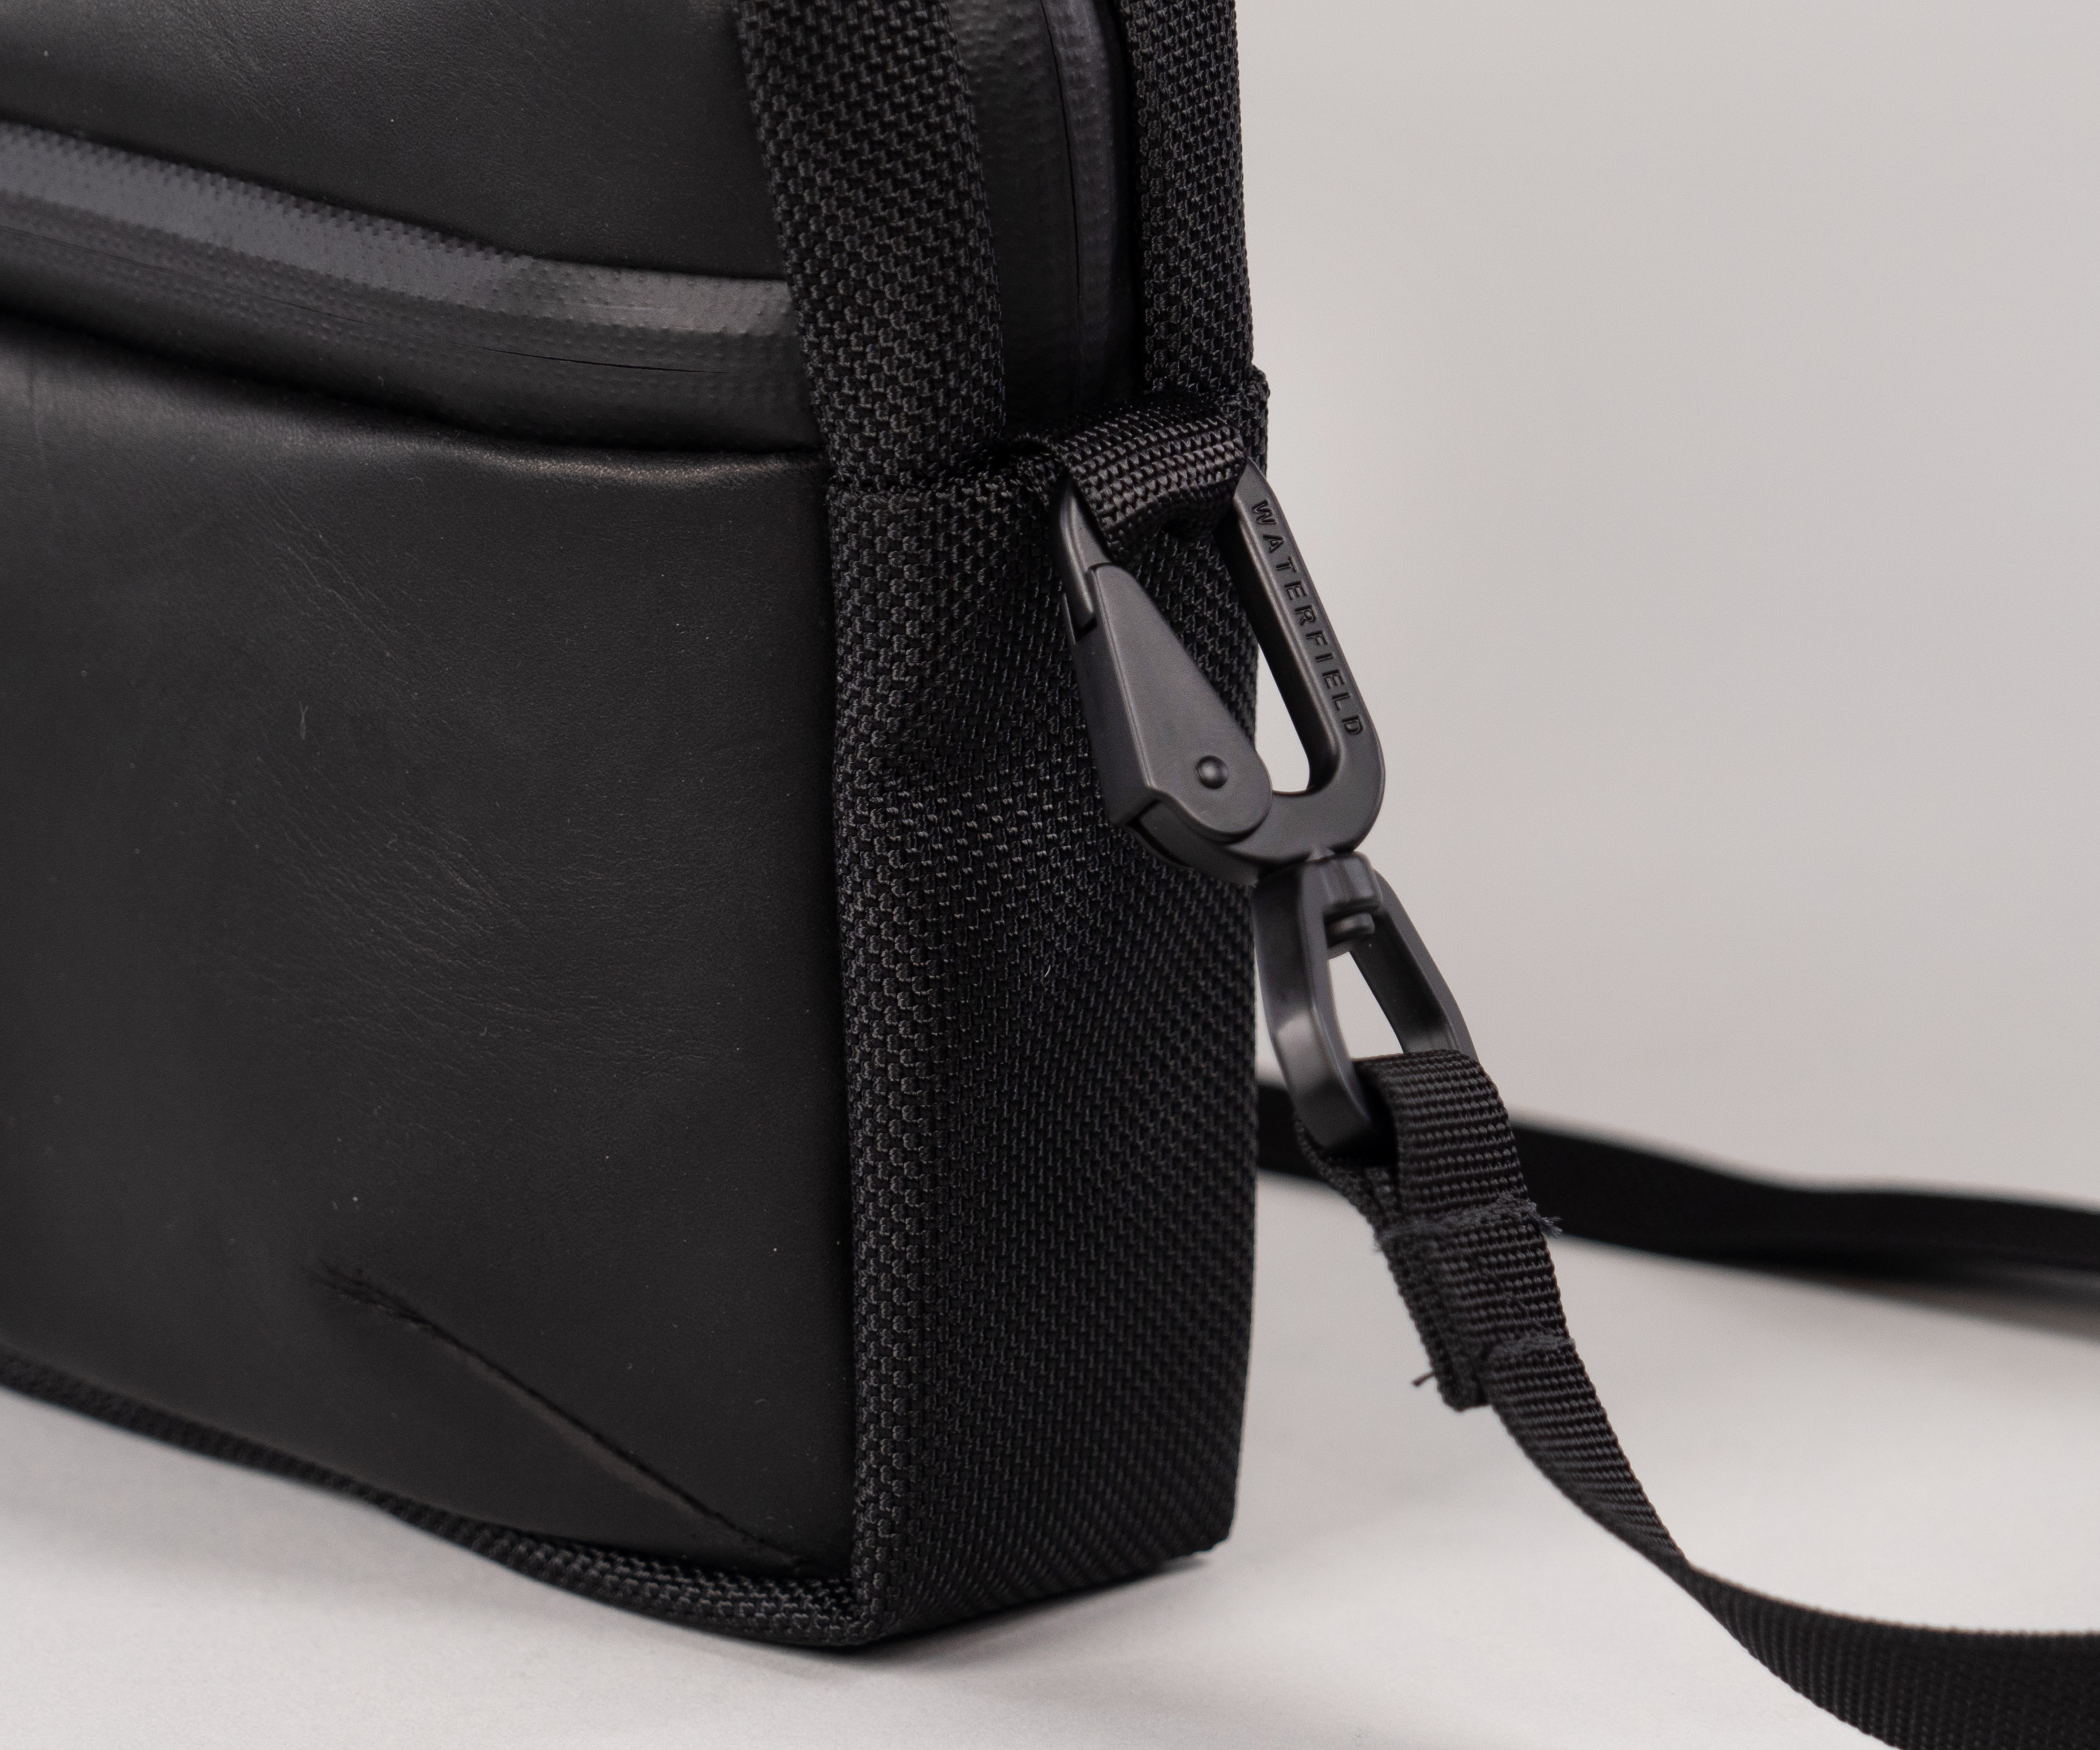 Removable strap attaches with custom metal hardware